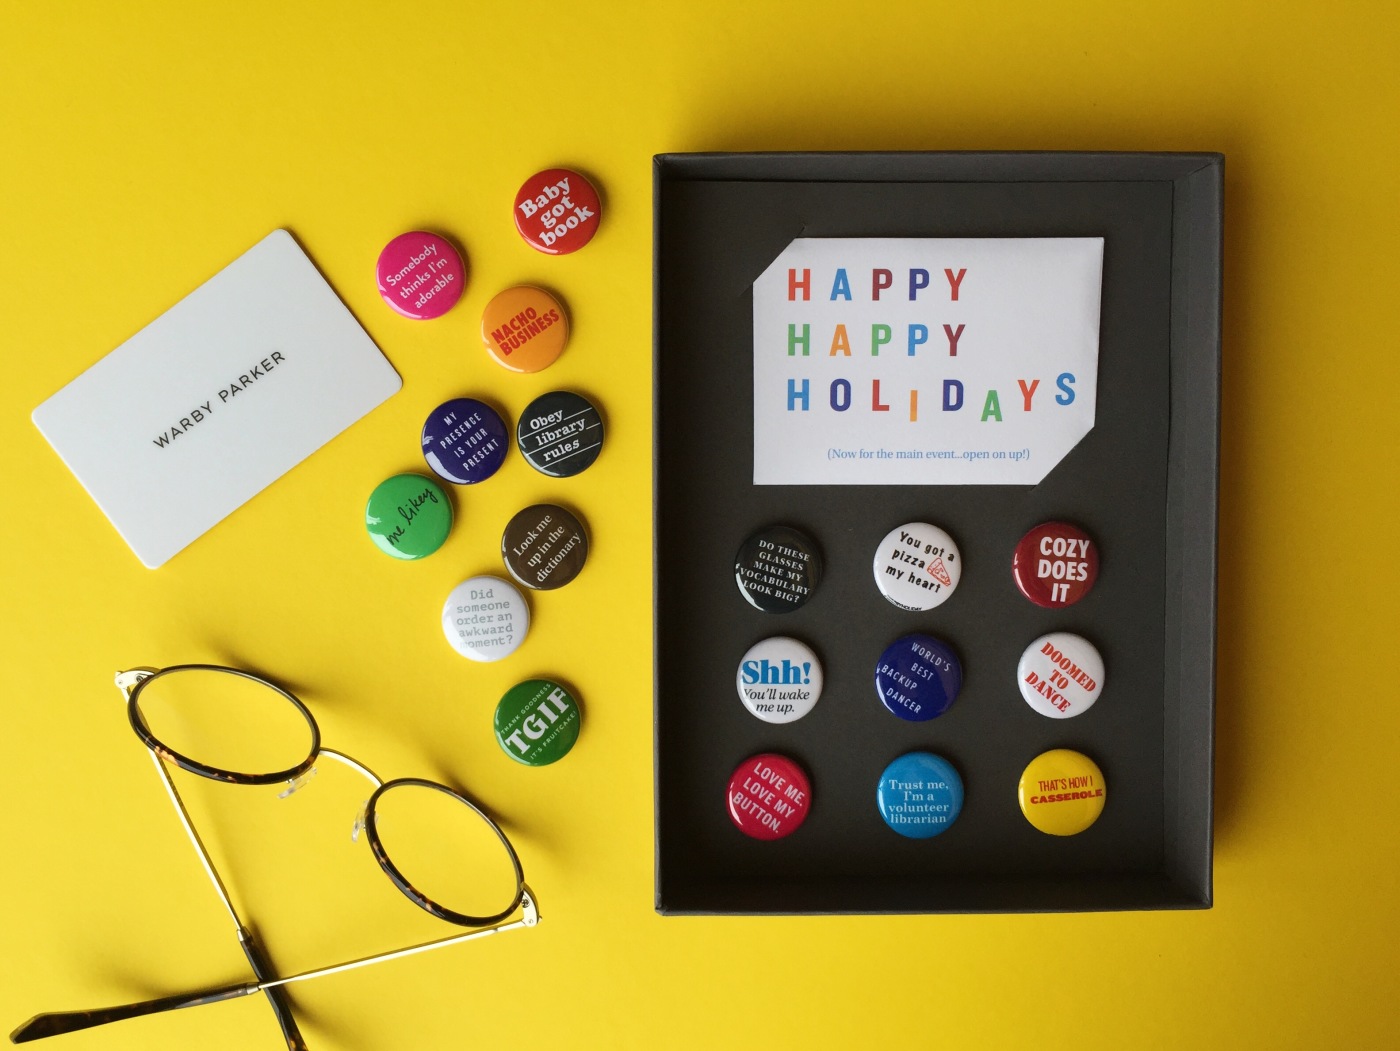 » Wanna win a gift card? And a custom button?Warby Parker